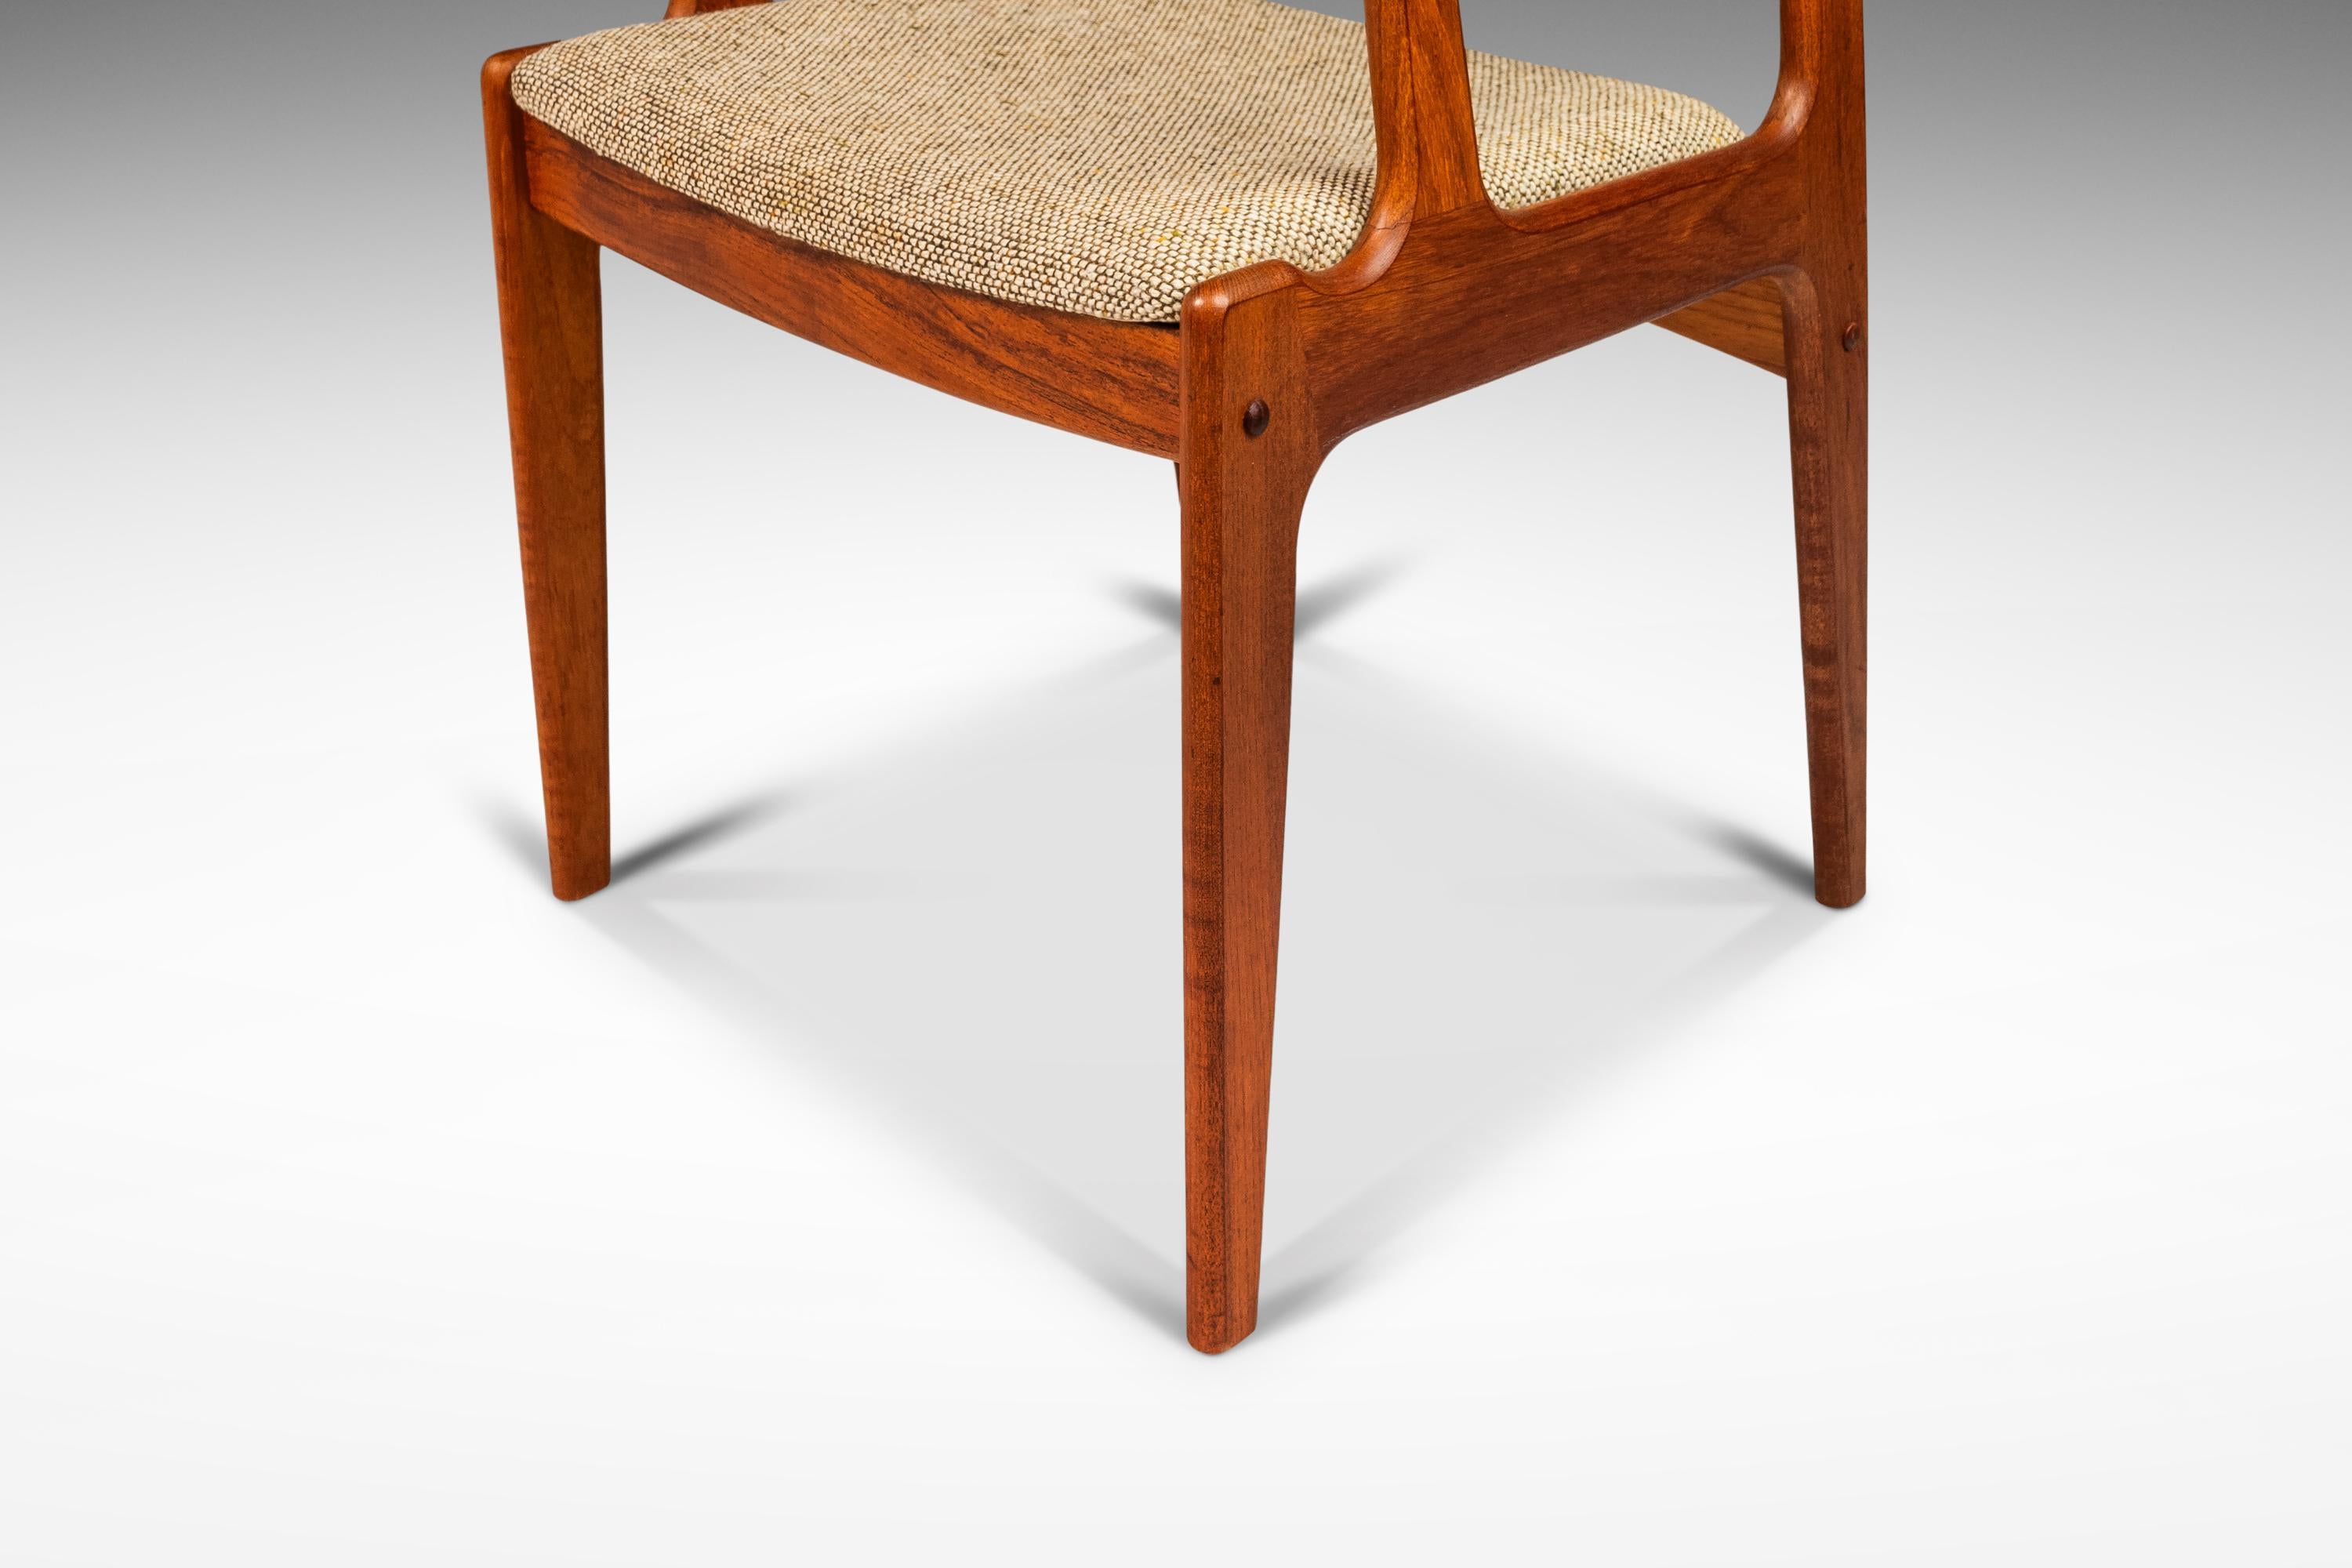 Danish Mid-Century Arm Chair in Solid Teak & Original Fabric by D-Scan, c. 1970s For Sale 5